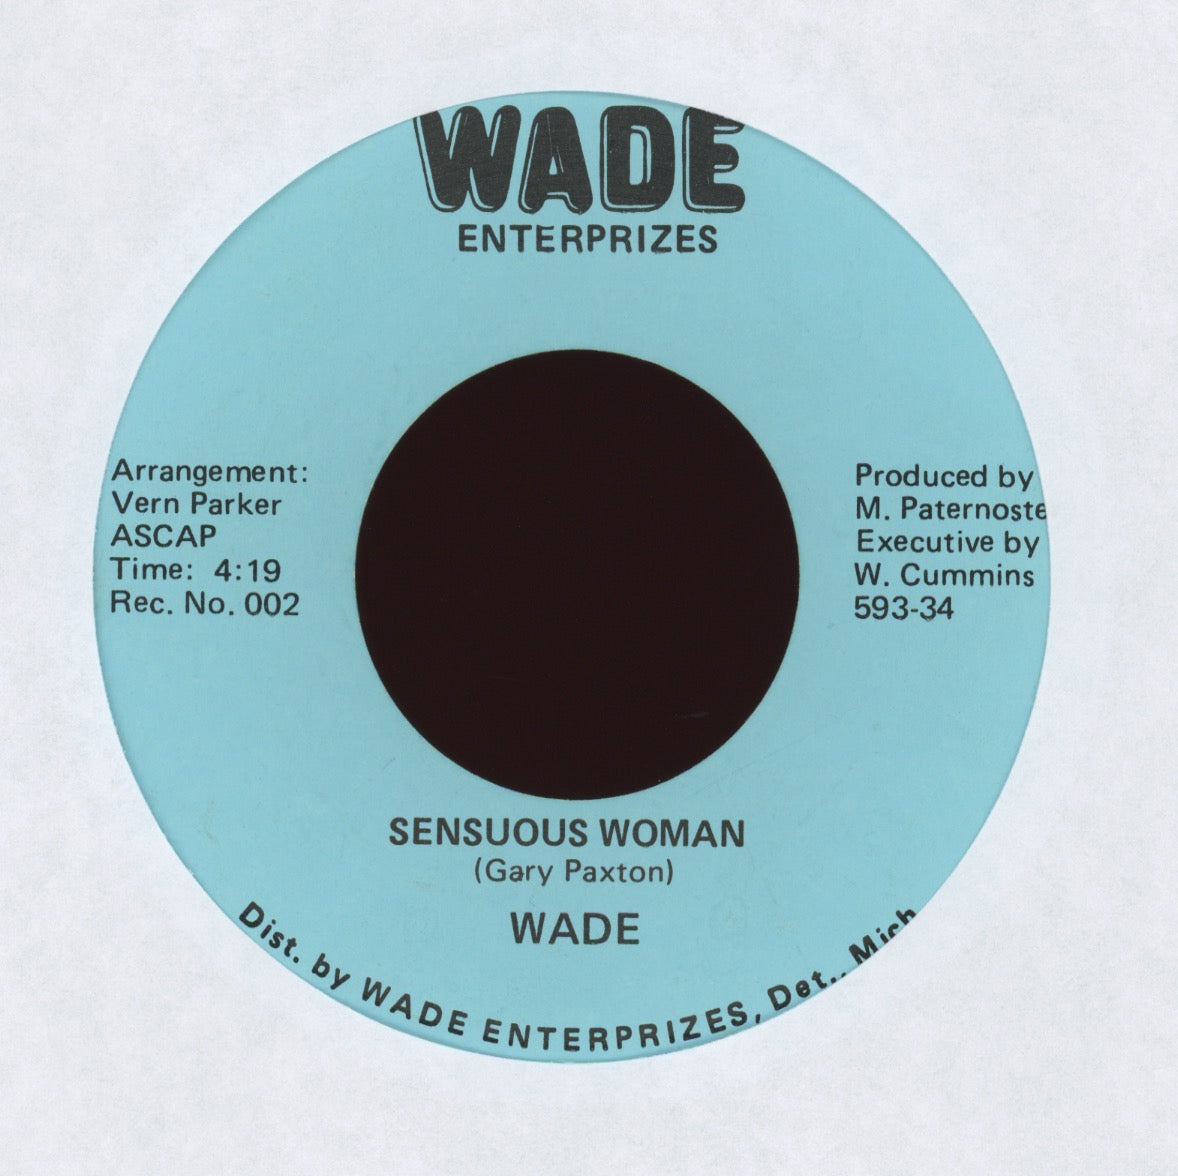 Wade - I Will Never Love You Anymore on Wade Enterprizes